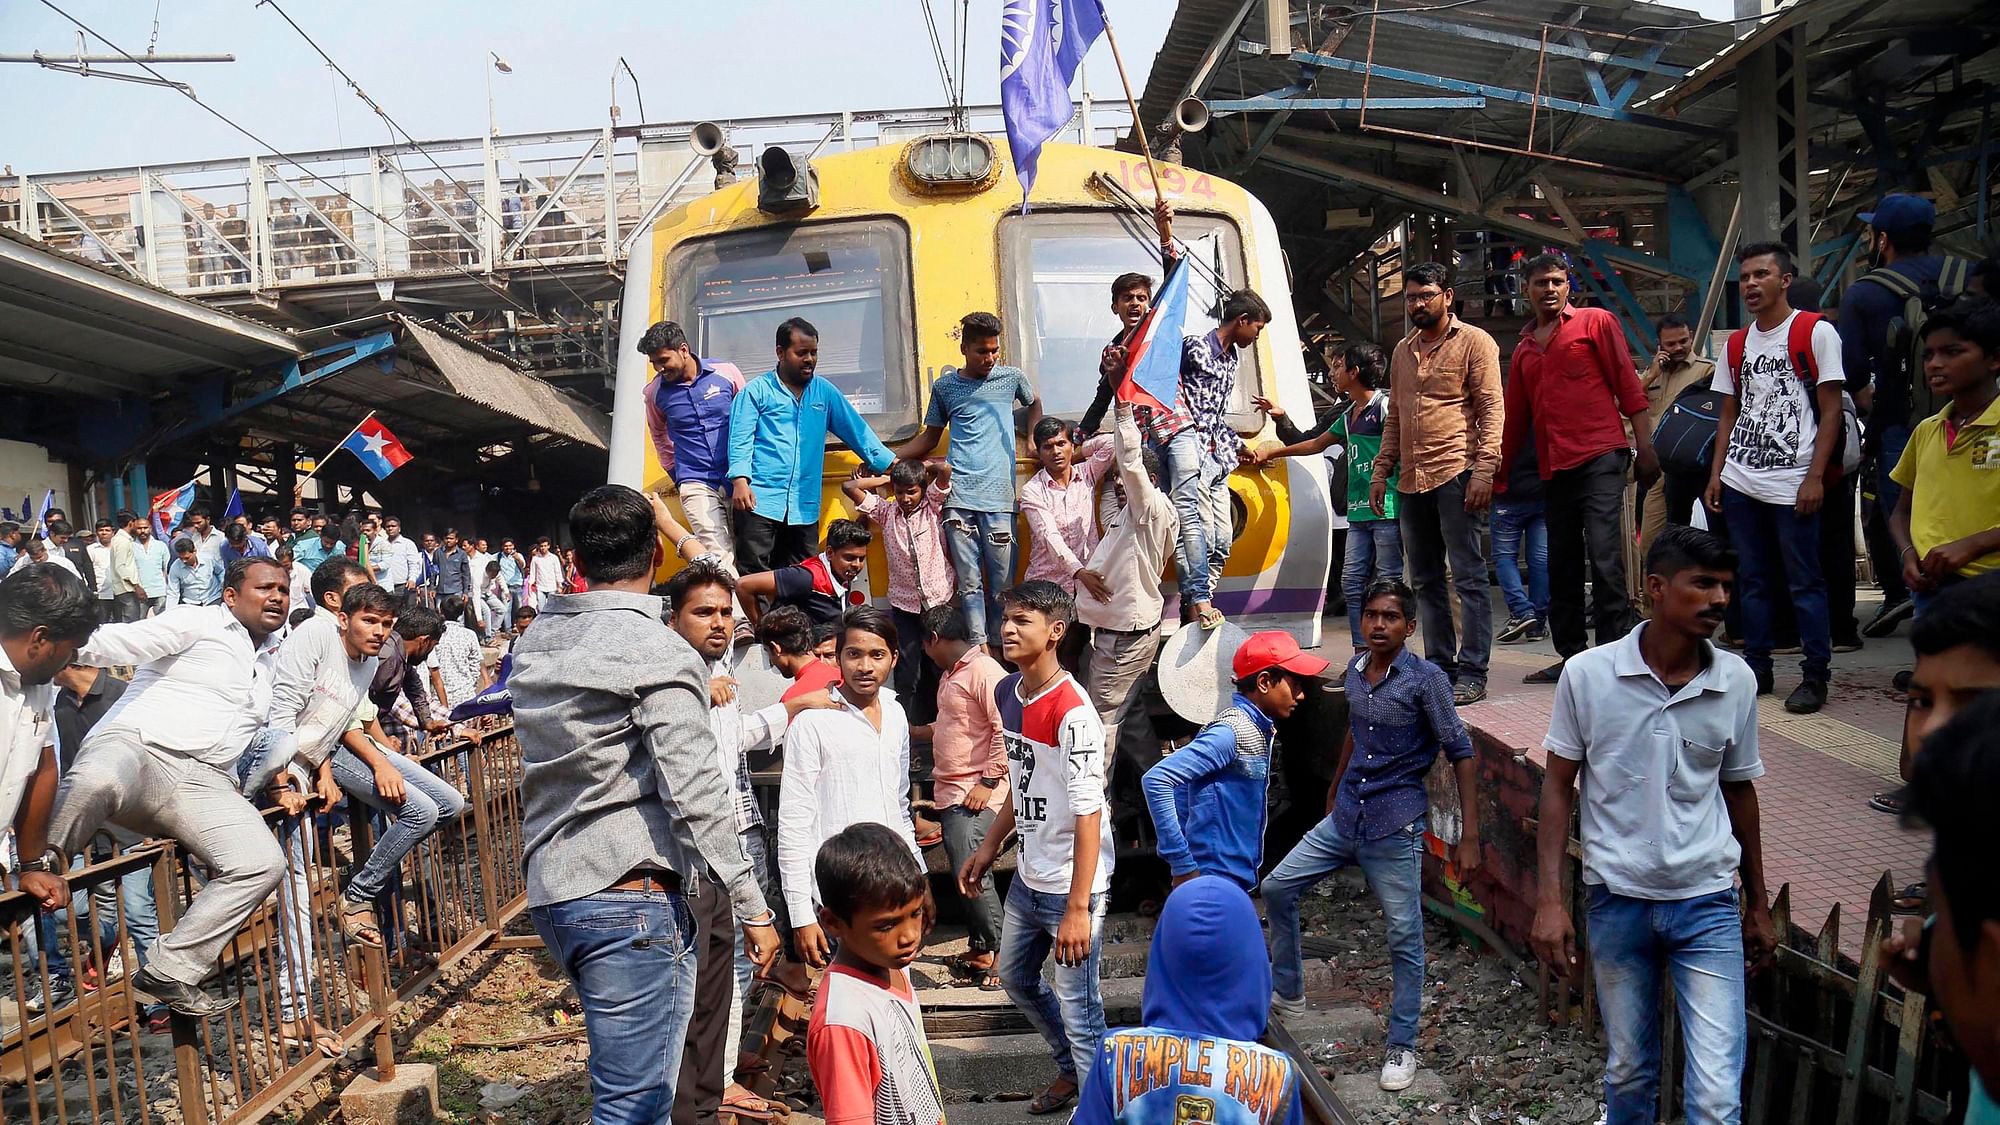 Dalit groups protesting at Thane railway station during the Maharashtra Bandh on Wednesday following clashes between two groups in Bhima Koregaon near Pune.